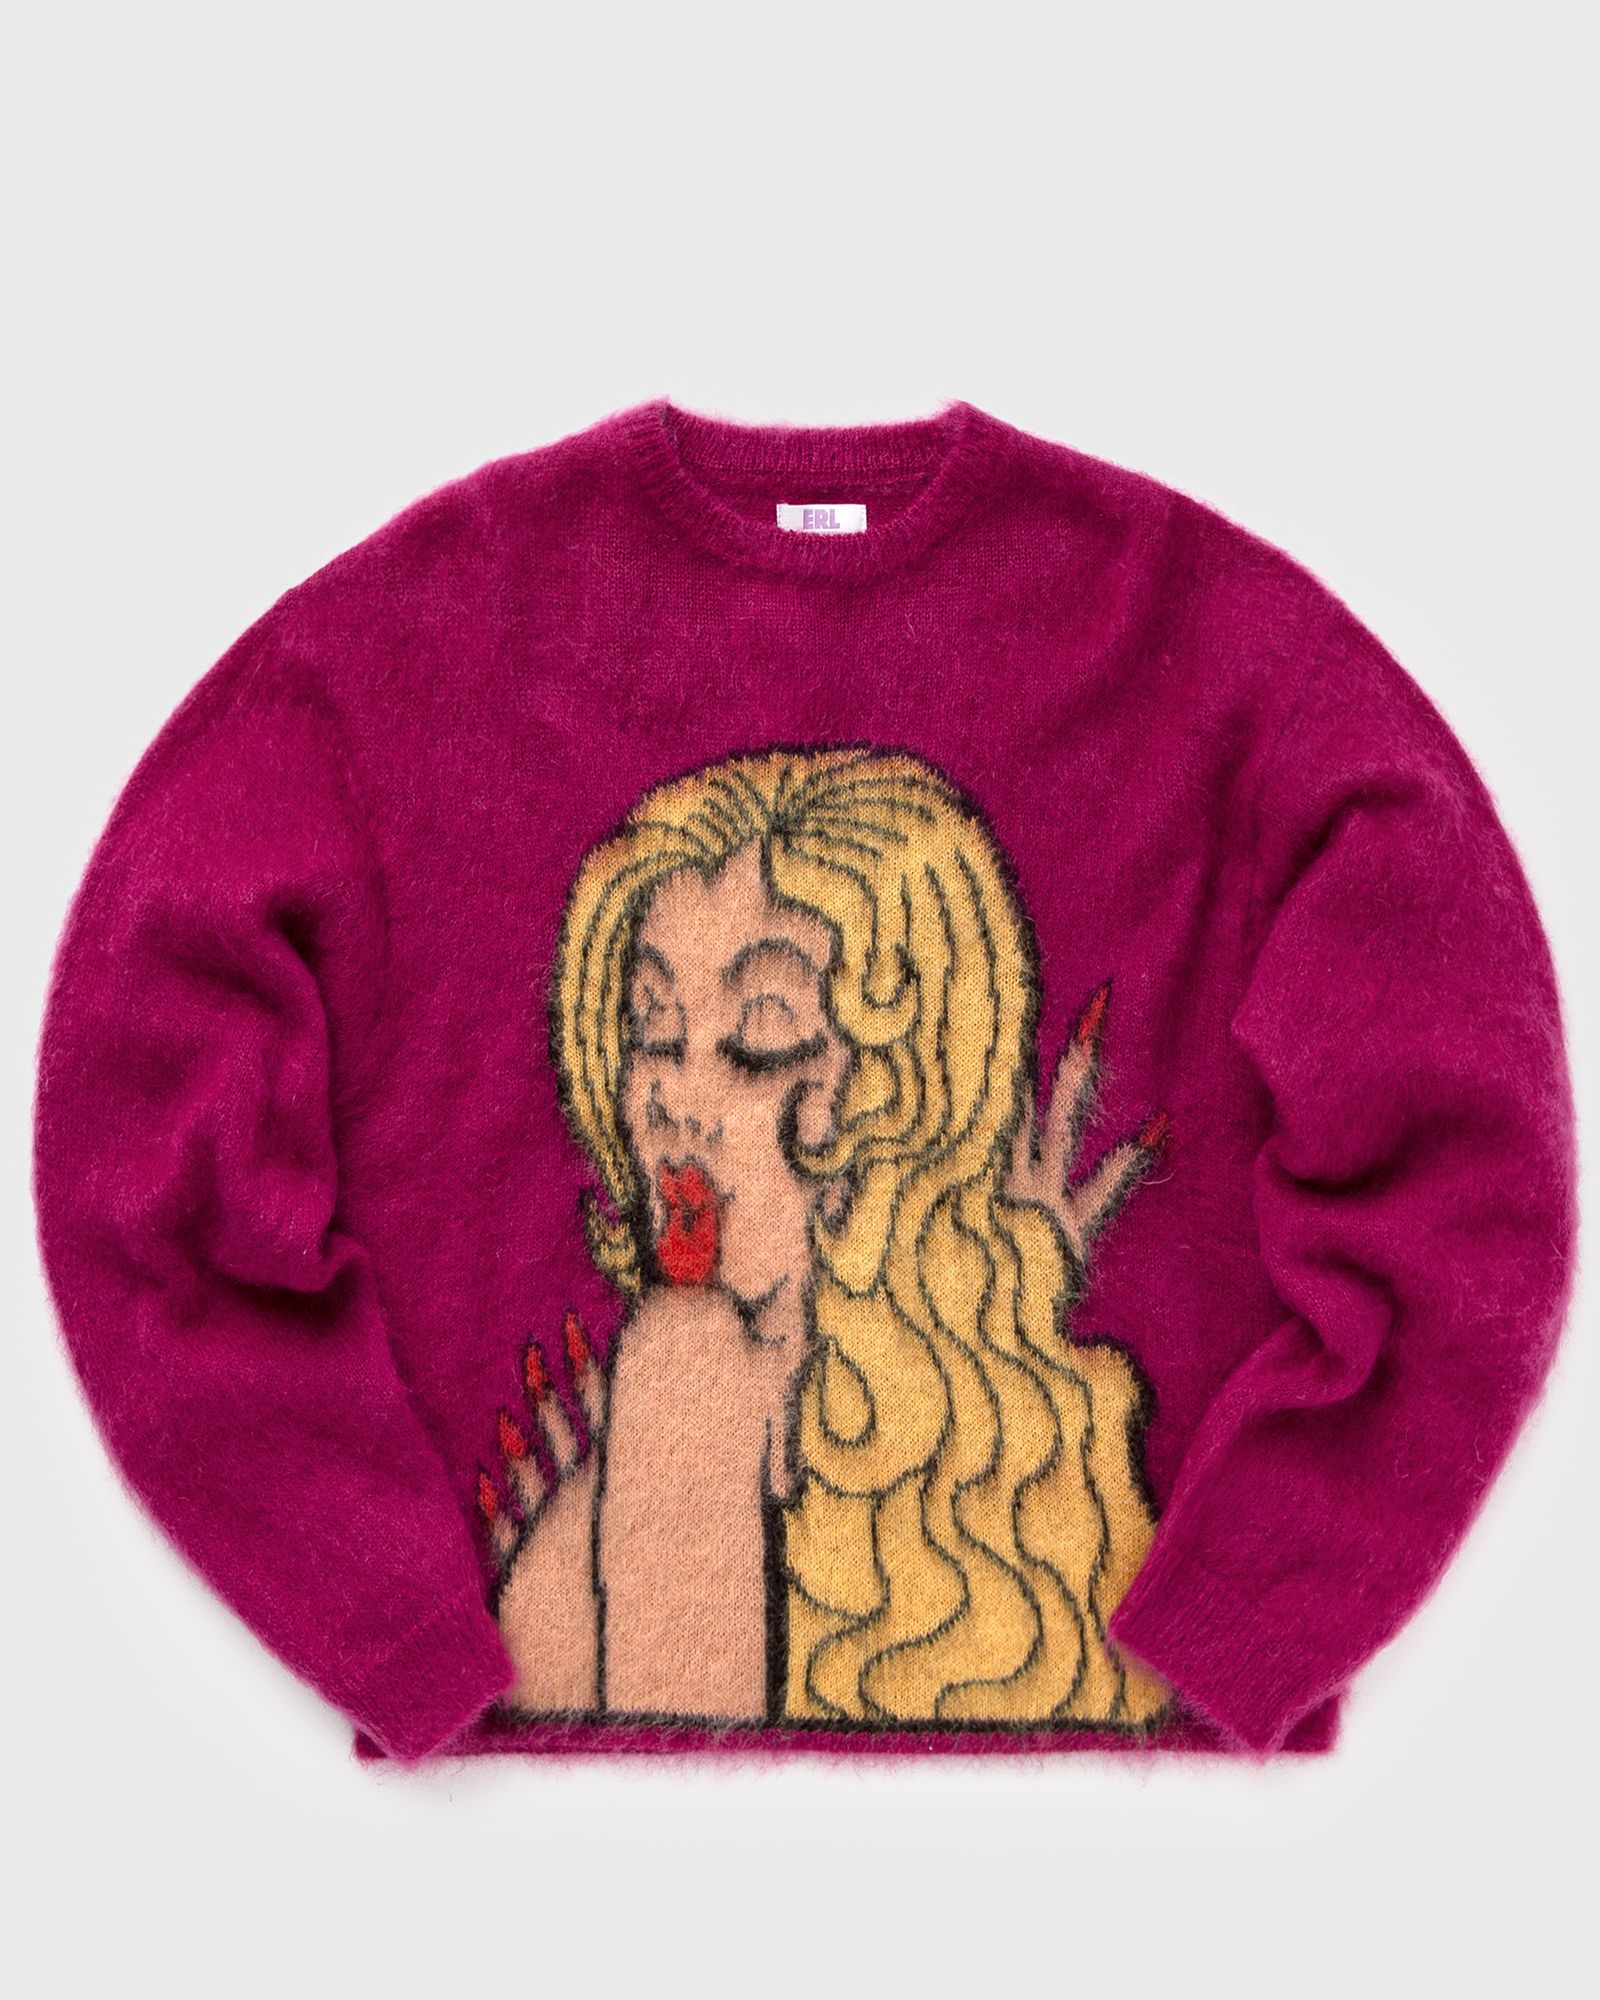 ERL - kiss mohair intarsia sweater knit men pullovers pink in größe:l